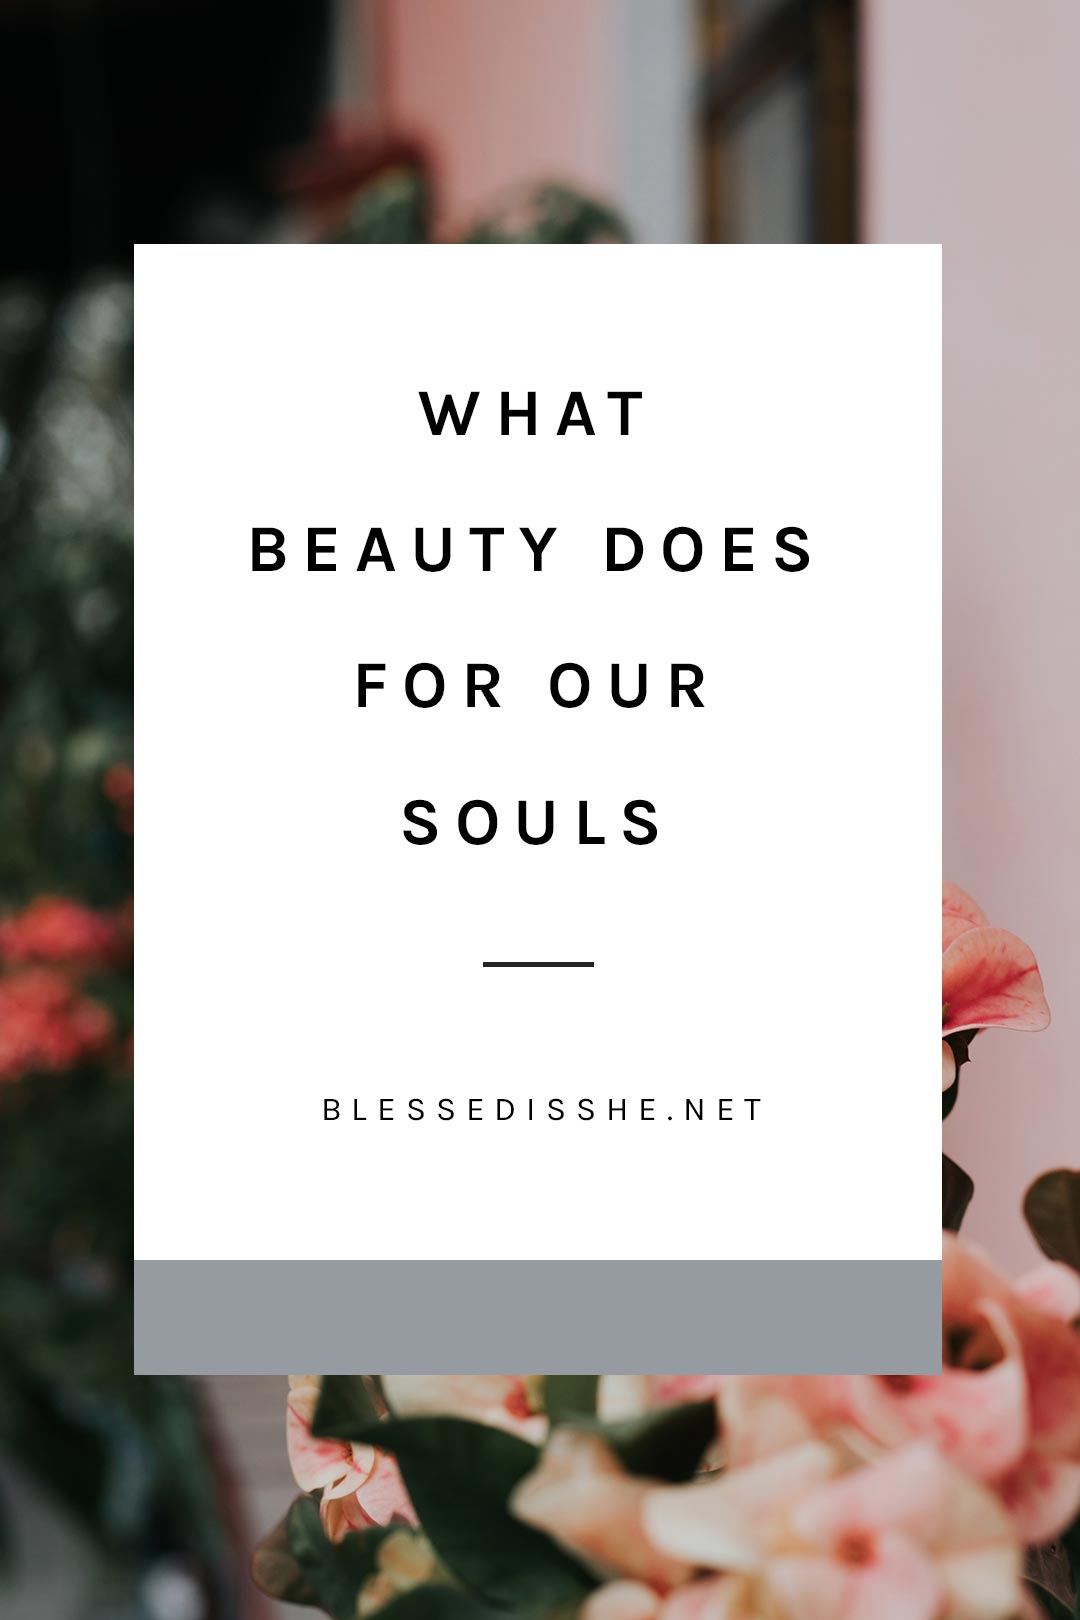 quotes about beautiful souls